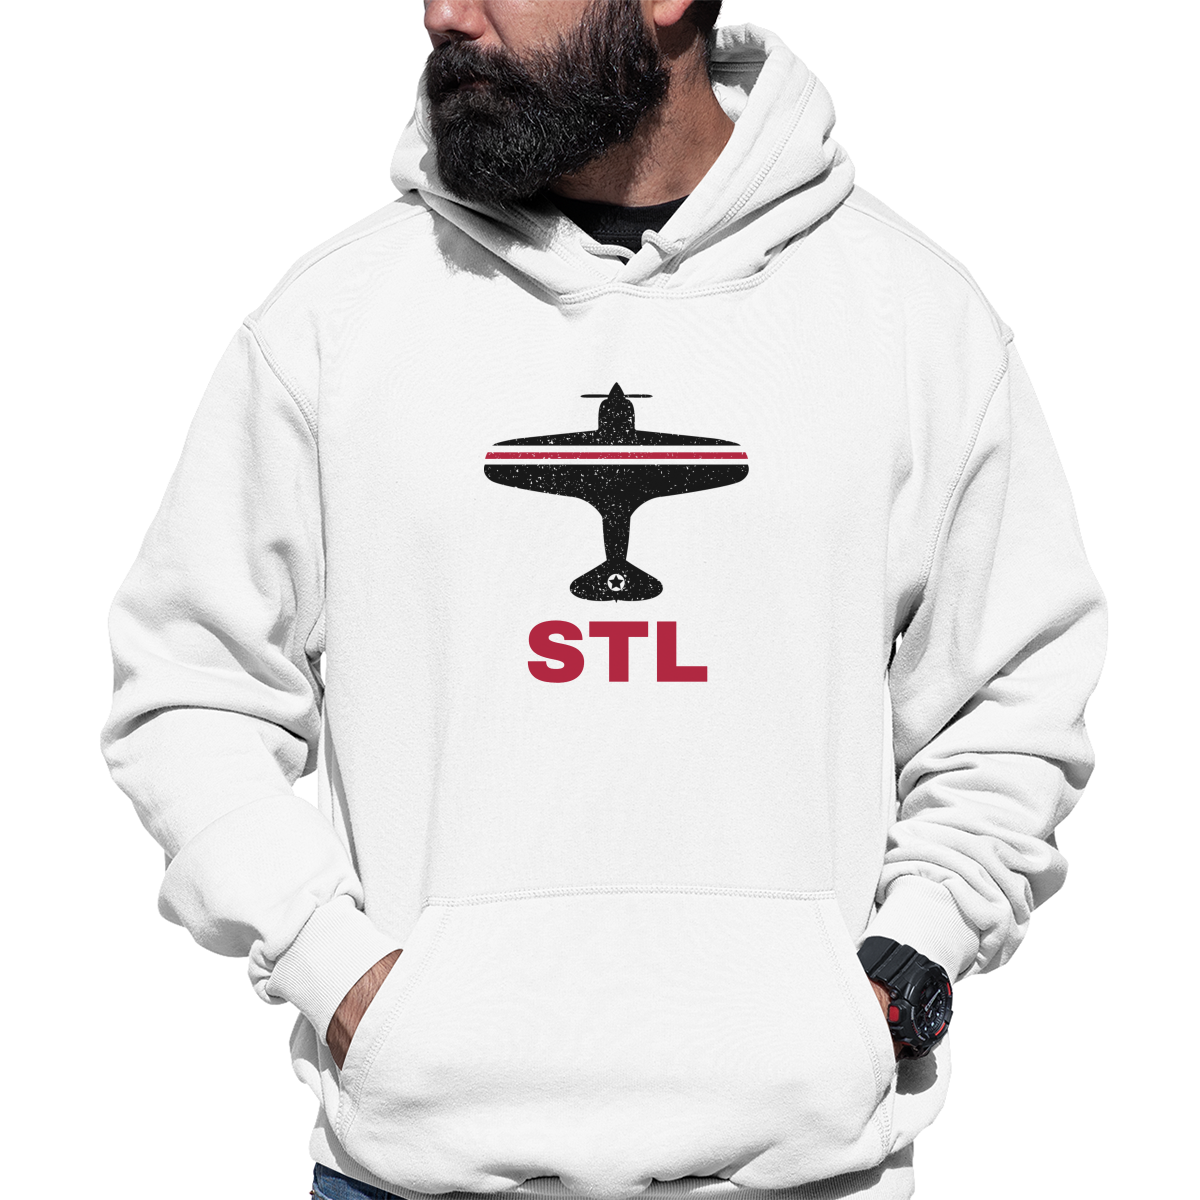 Fly St. Louis STL Airport Unisex Hoodie | White